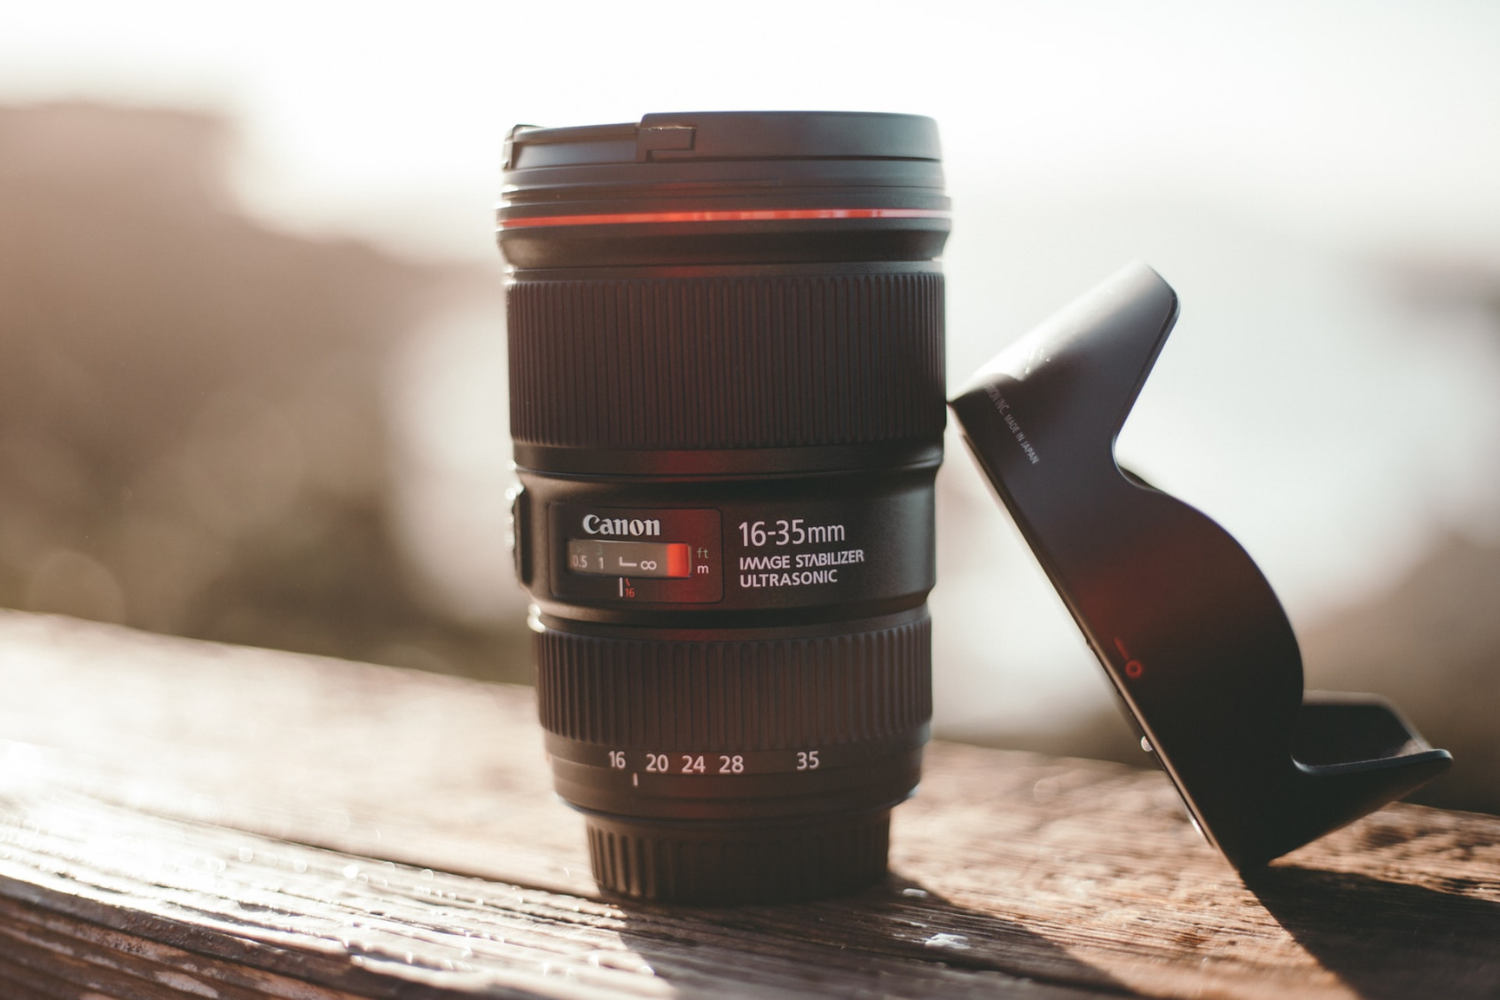 Canon lens Photo by KAL VISUALS on Unsplash